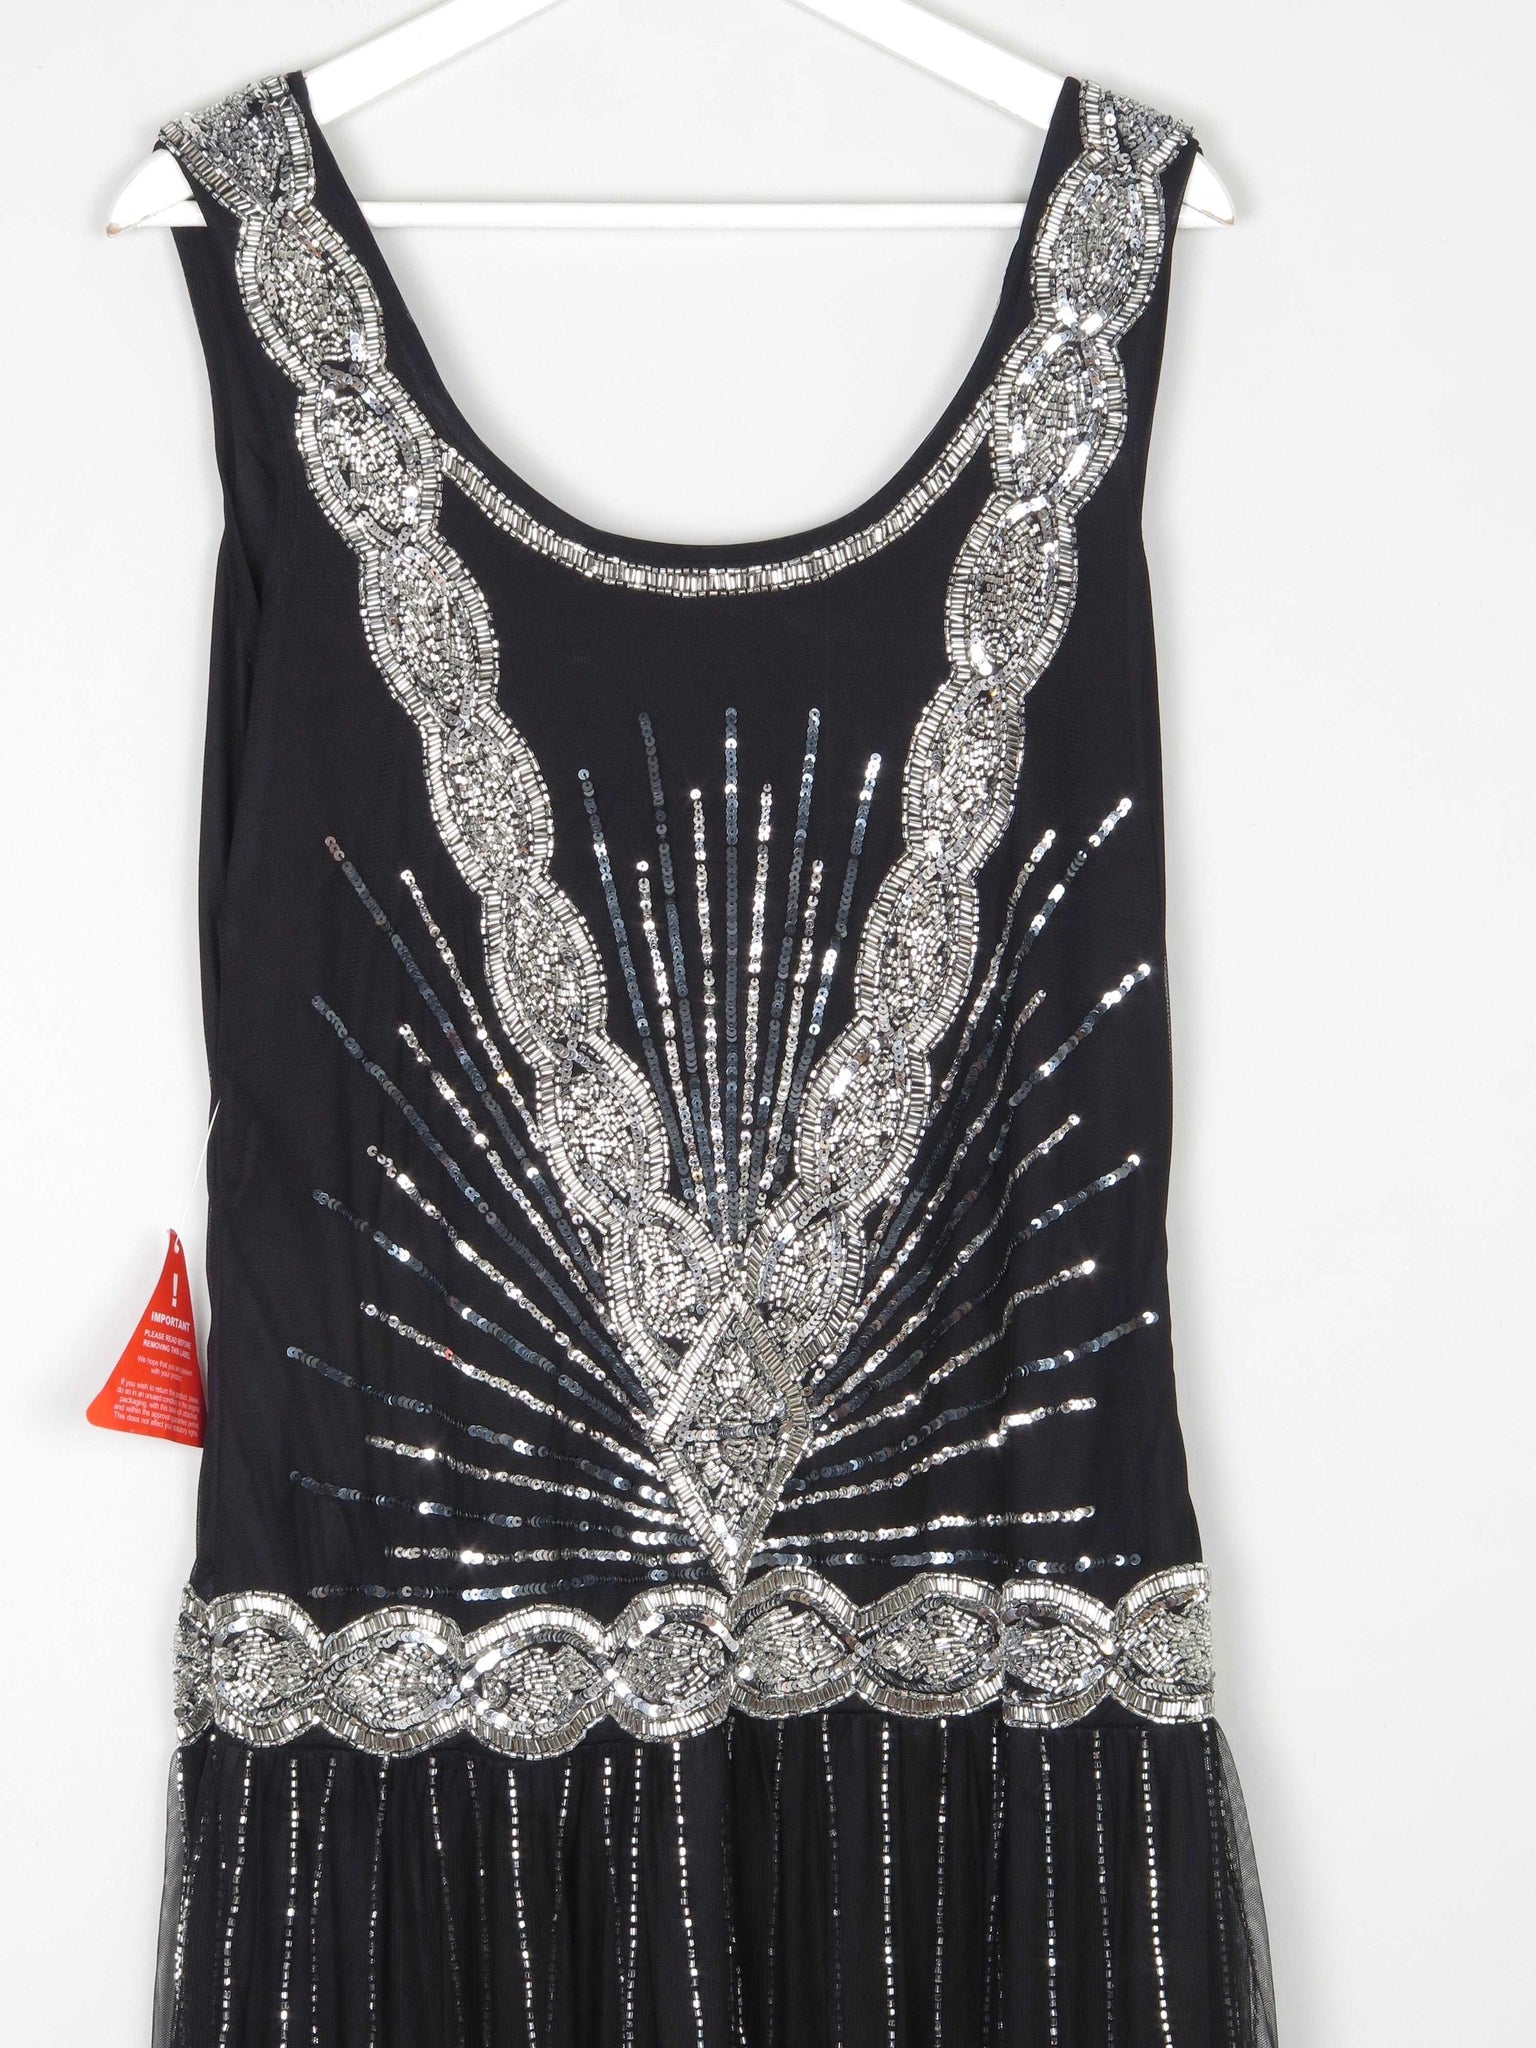 Black & Silver Flapper Style 1920s Dress 14 - The Harlequin